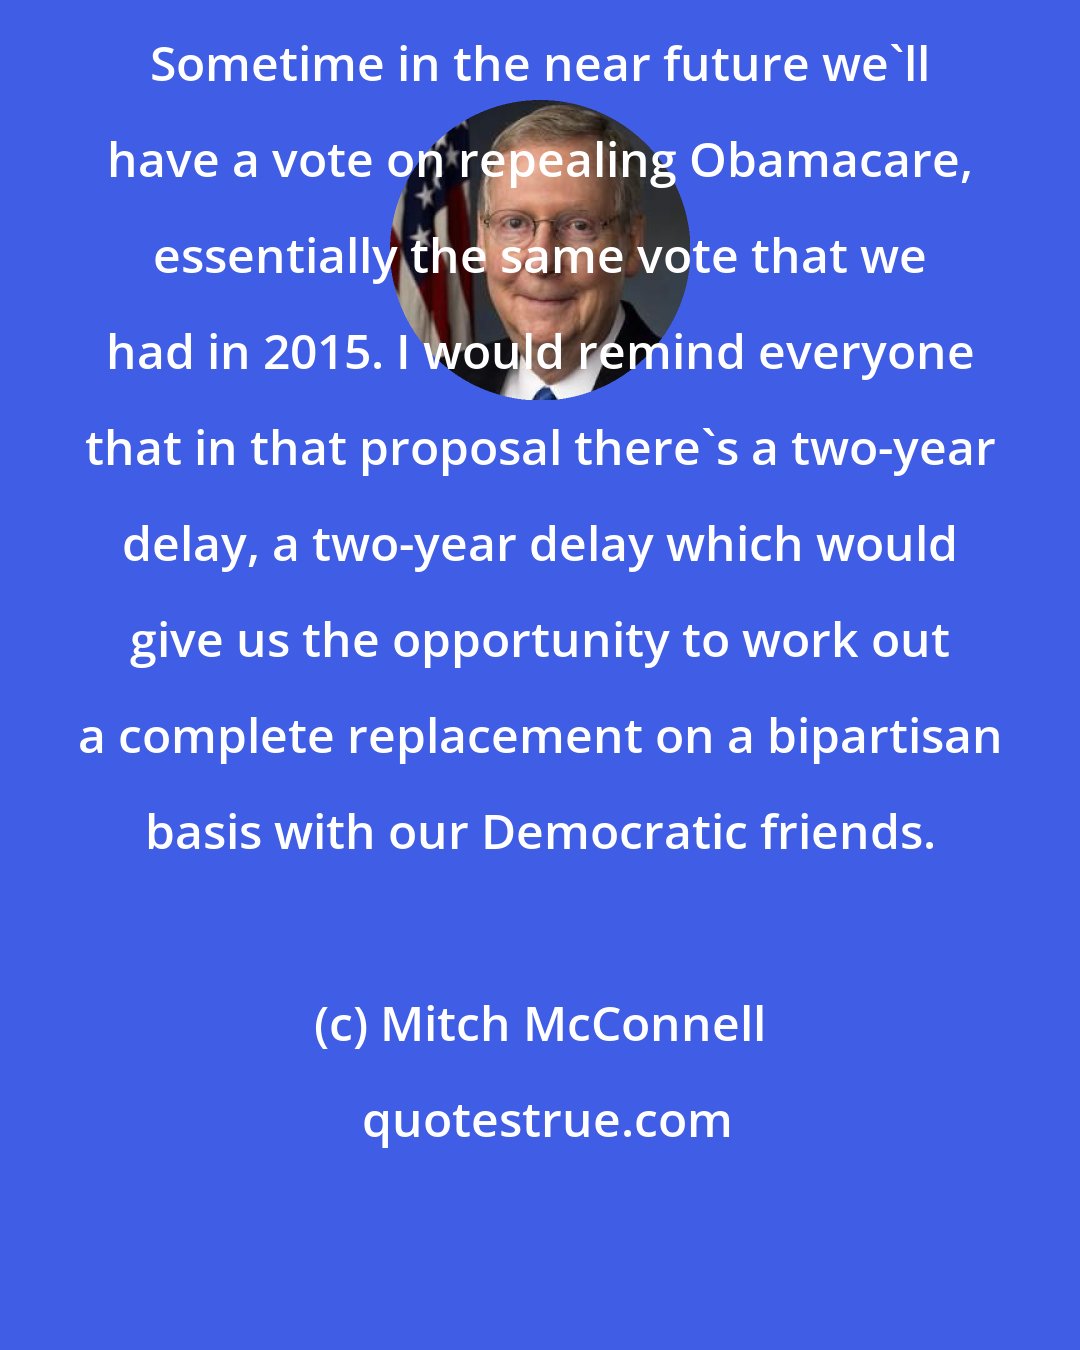 Mitch McConnell: Sometime in the near future we'll have a vote on repealing Obamacare, essentially the same vote that we had in 2015. I would remind everyone that in that proposal there's a two-year delay, a two-year delay which would give us the opportunity to work out a complete replacement on a bipartisan basis with our Democratic friends.